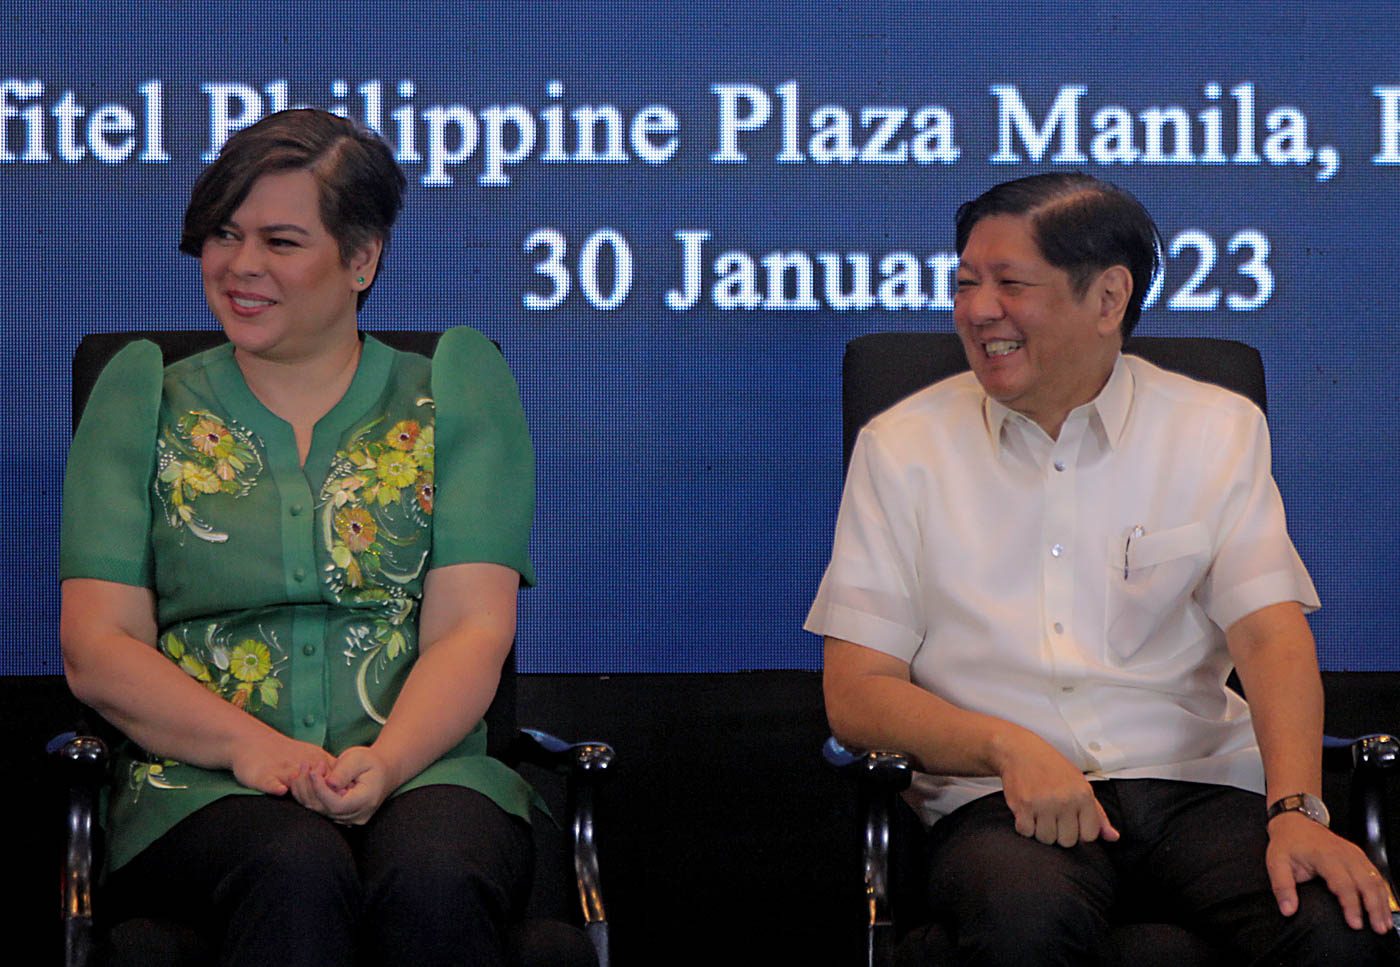 Sara Duterte didn’t mention plans for malnourished students – experts